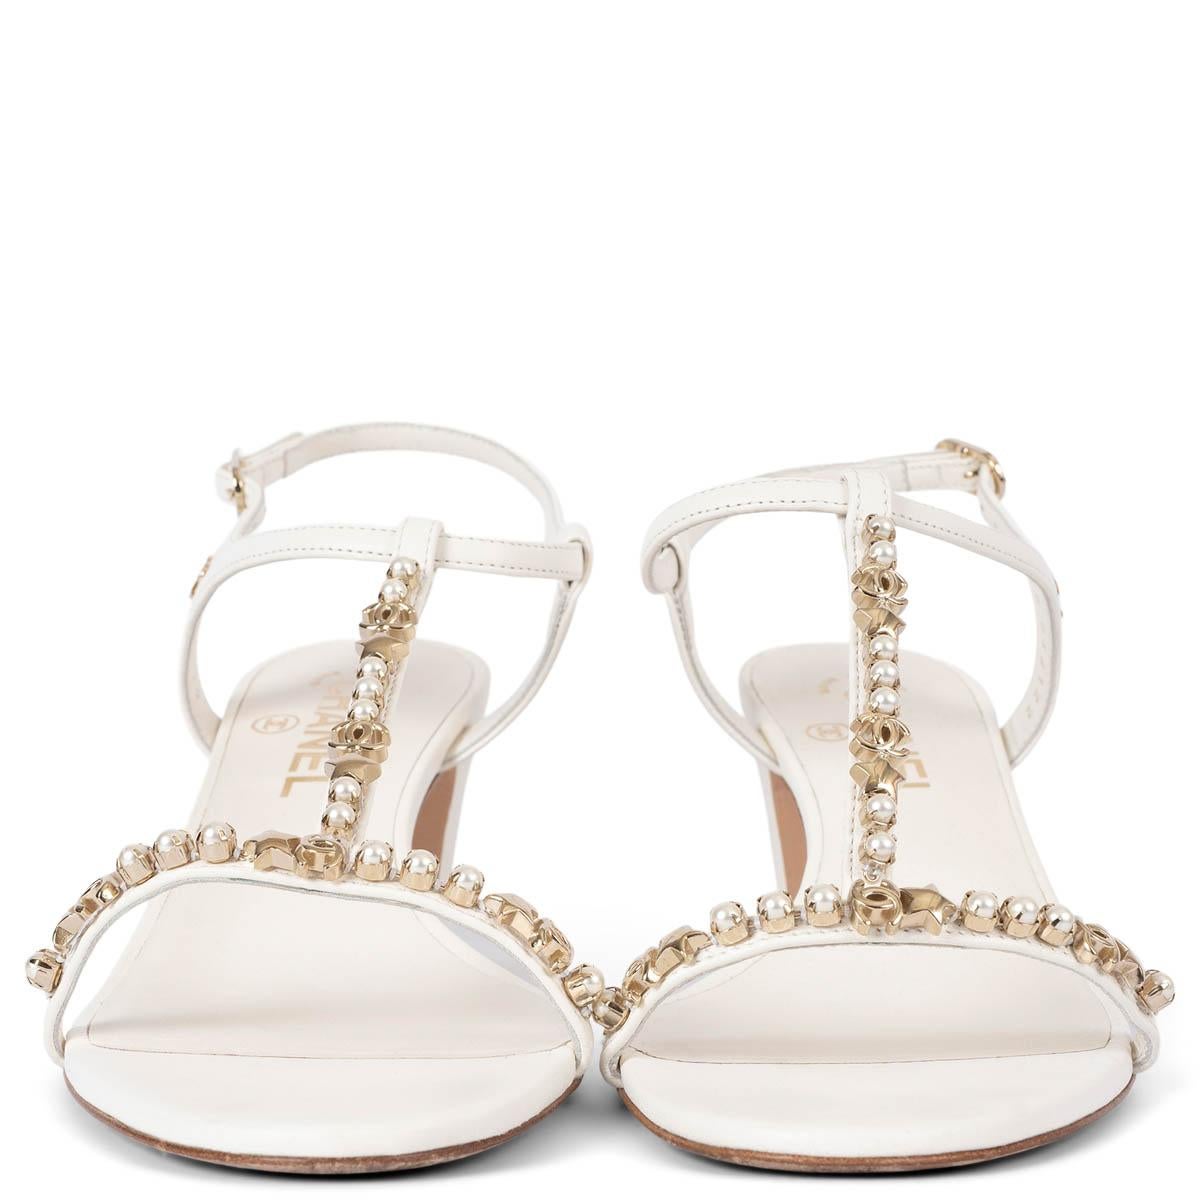 100% authentic Chanel t-strap sandals in off-white leather embellished with faux pearls, light gold-tone stars and CC logos. Have been worn and are in excellent condition. Come with dust bags. 

2020 Spring/Summer

Measurements
Model	20S G36122